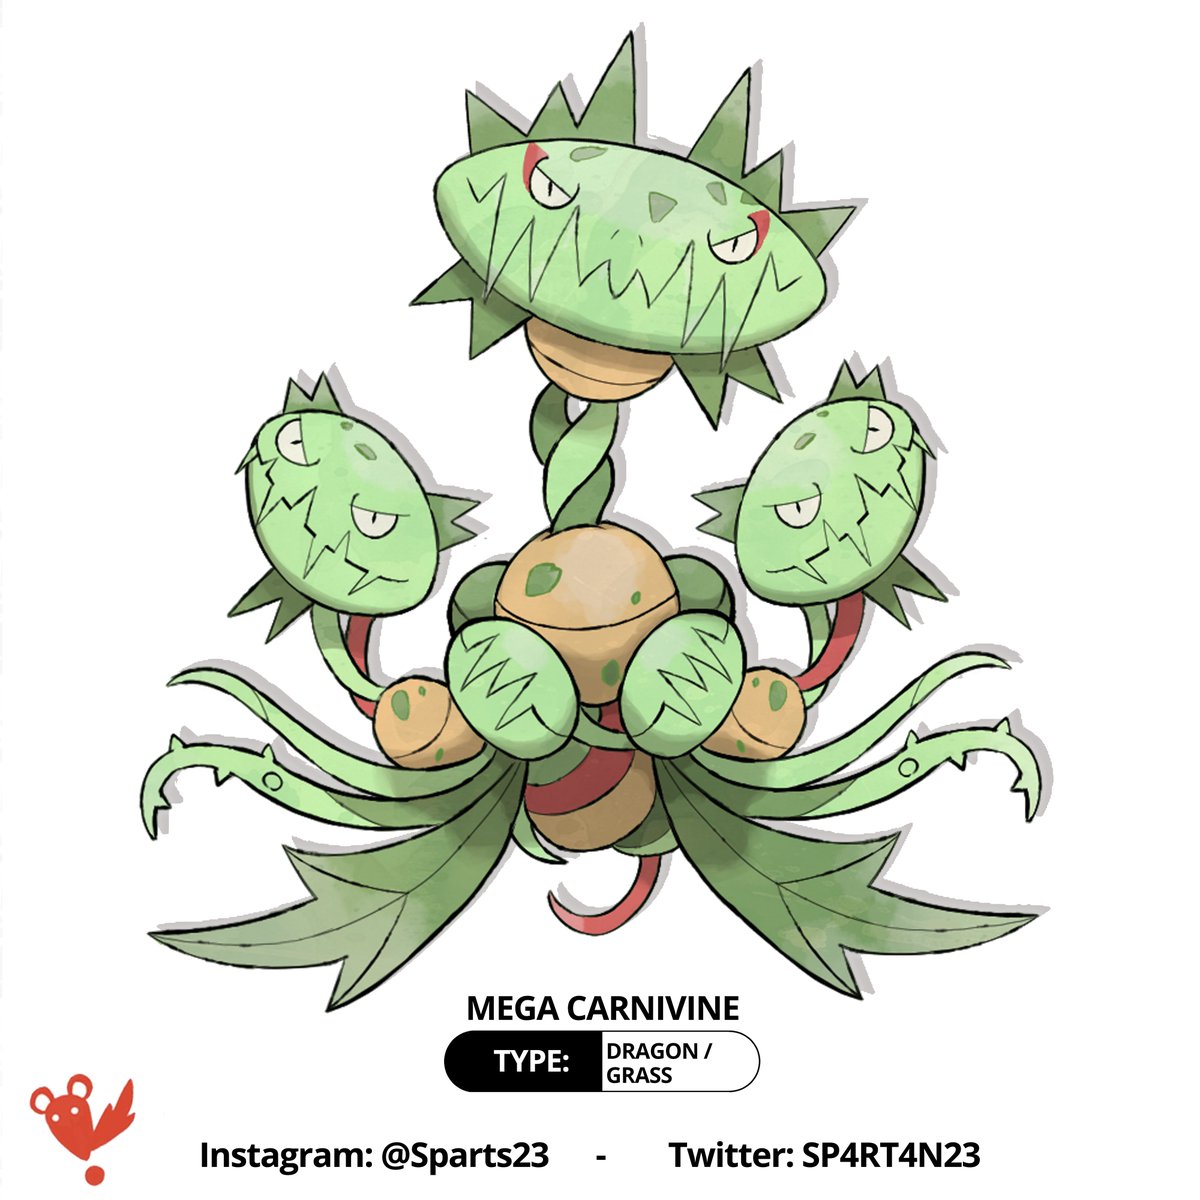 Mega Carnivine. Inspired after the legend of Yamata no Orochi and the Hydra snake, In order to give Carnivine a more wild and agressive yet a bit  crazy design.
#PokemonScarletViolet  #pokemon